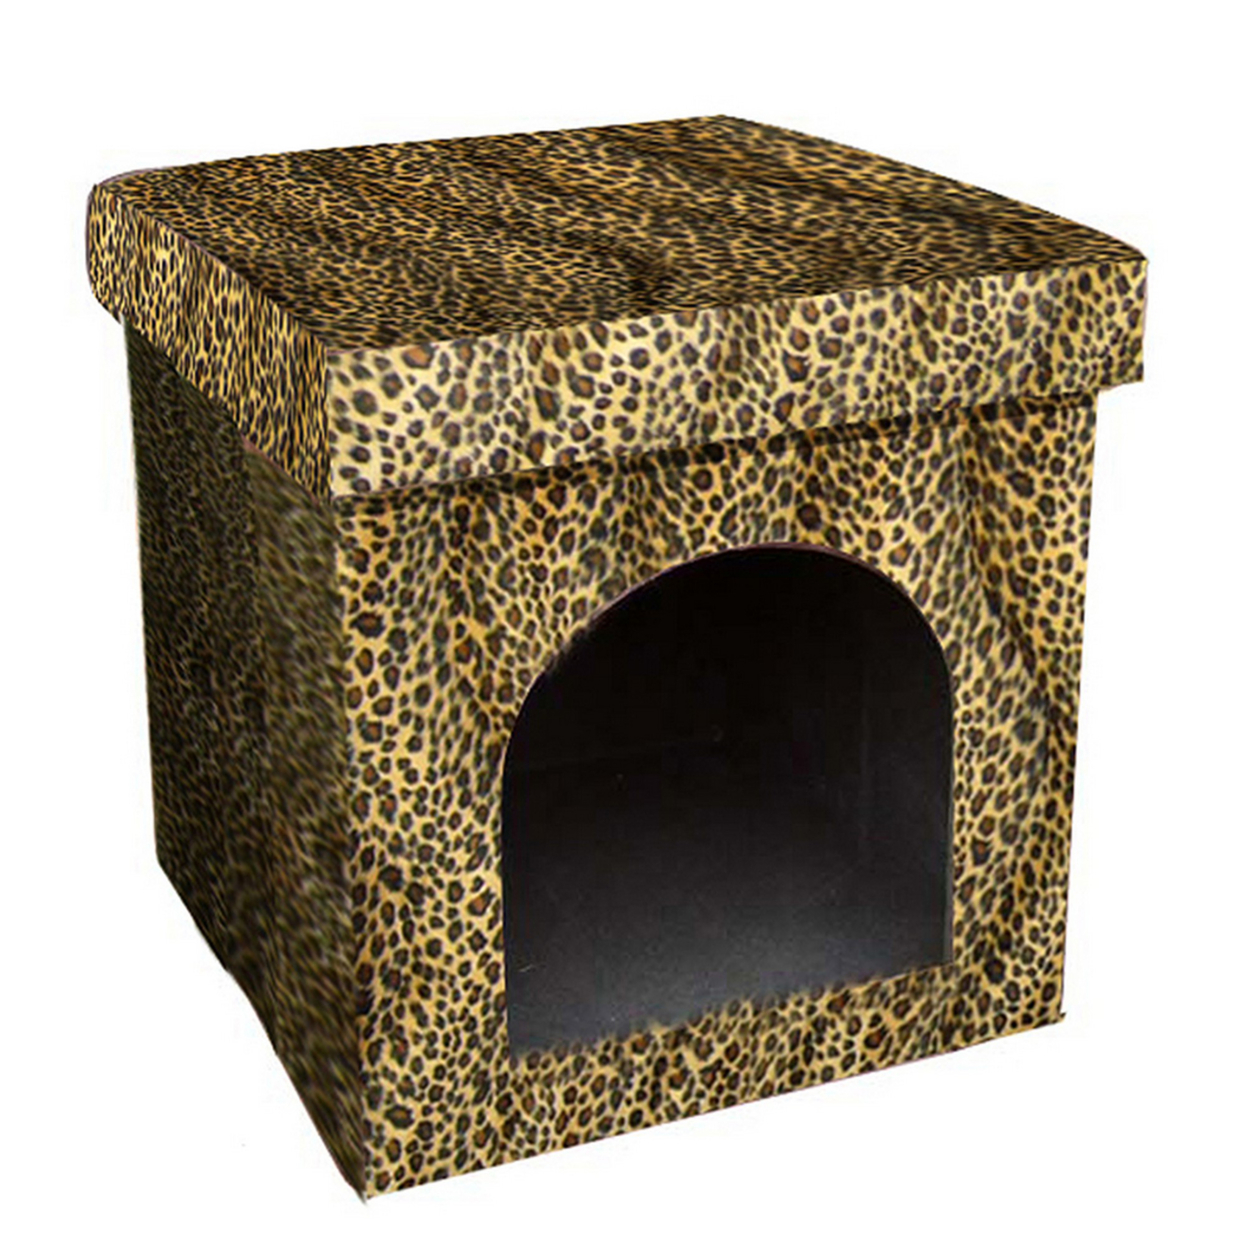 Pet House With Leopard Print Fabric And Removable Top, Gold And Black- Saltoro Sherpi